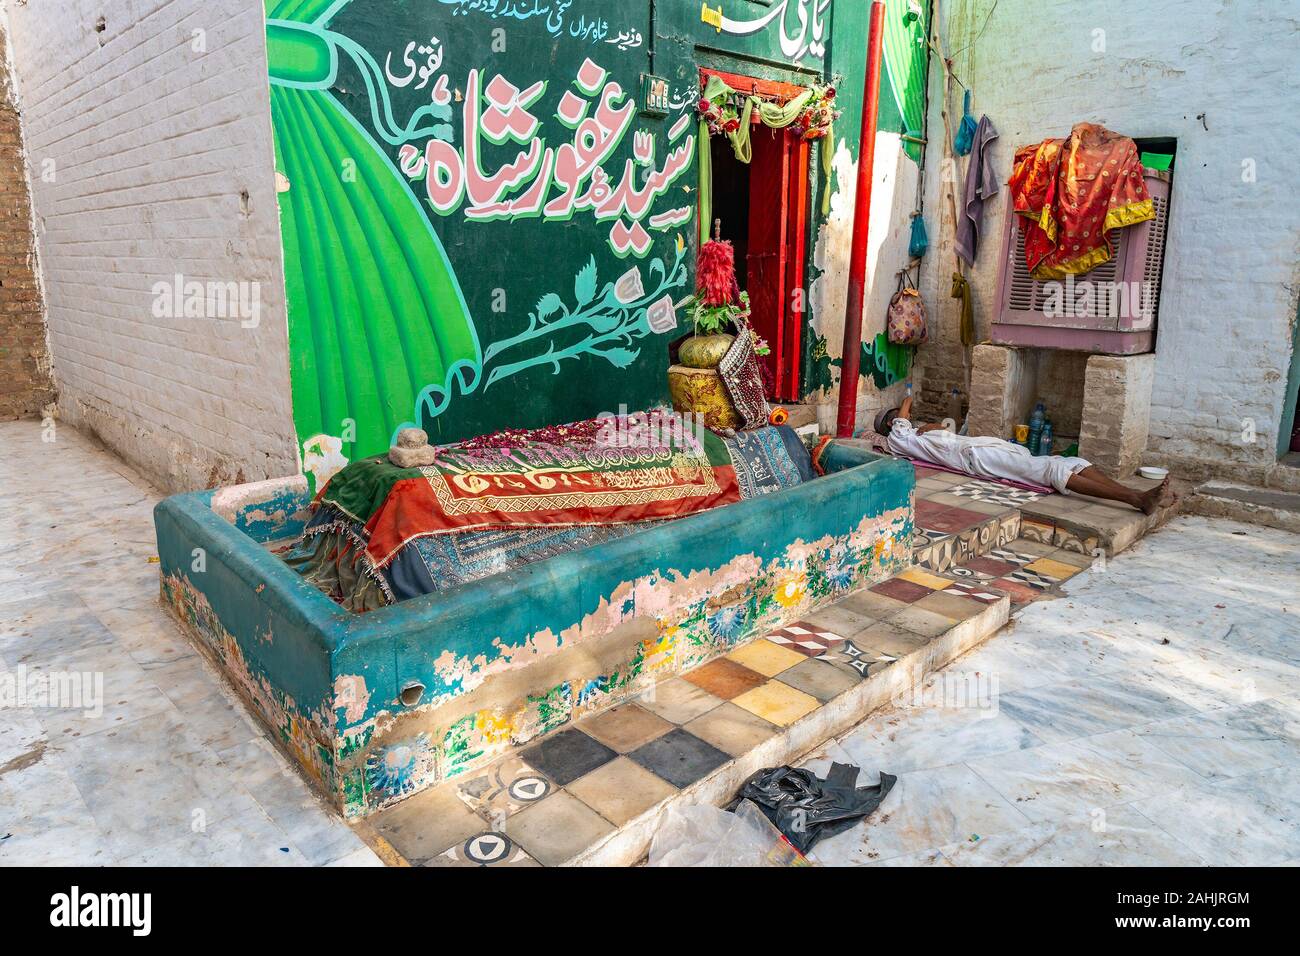 Sehwan Sharif Darbar Shah Mardan Sikandar Bodla Bahar Tomb Picturesque View of Grave Coffin and a Sleeping Man on a Sunny Blue Sky Day Stock Photo